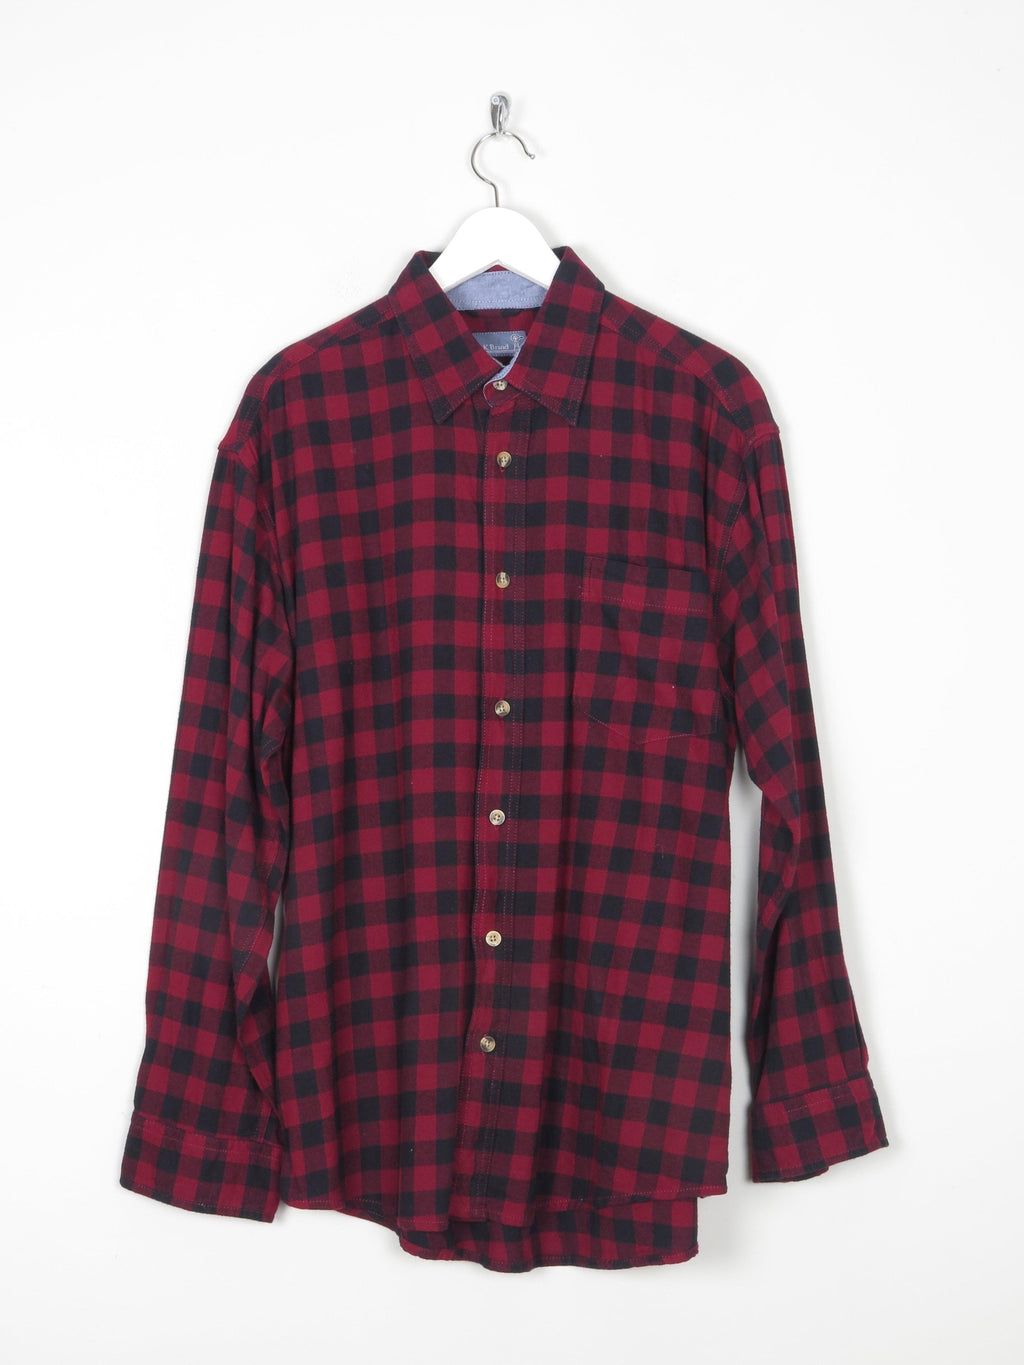 Men's Red & Navy Check Flannel Shirt L - The Harlequin